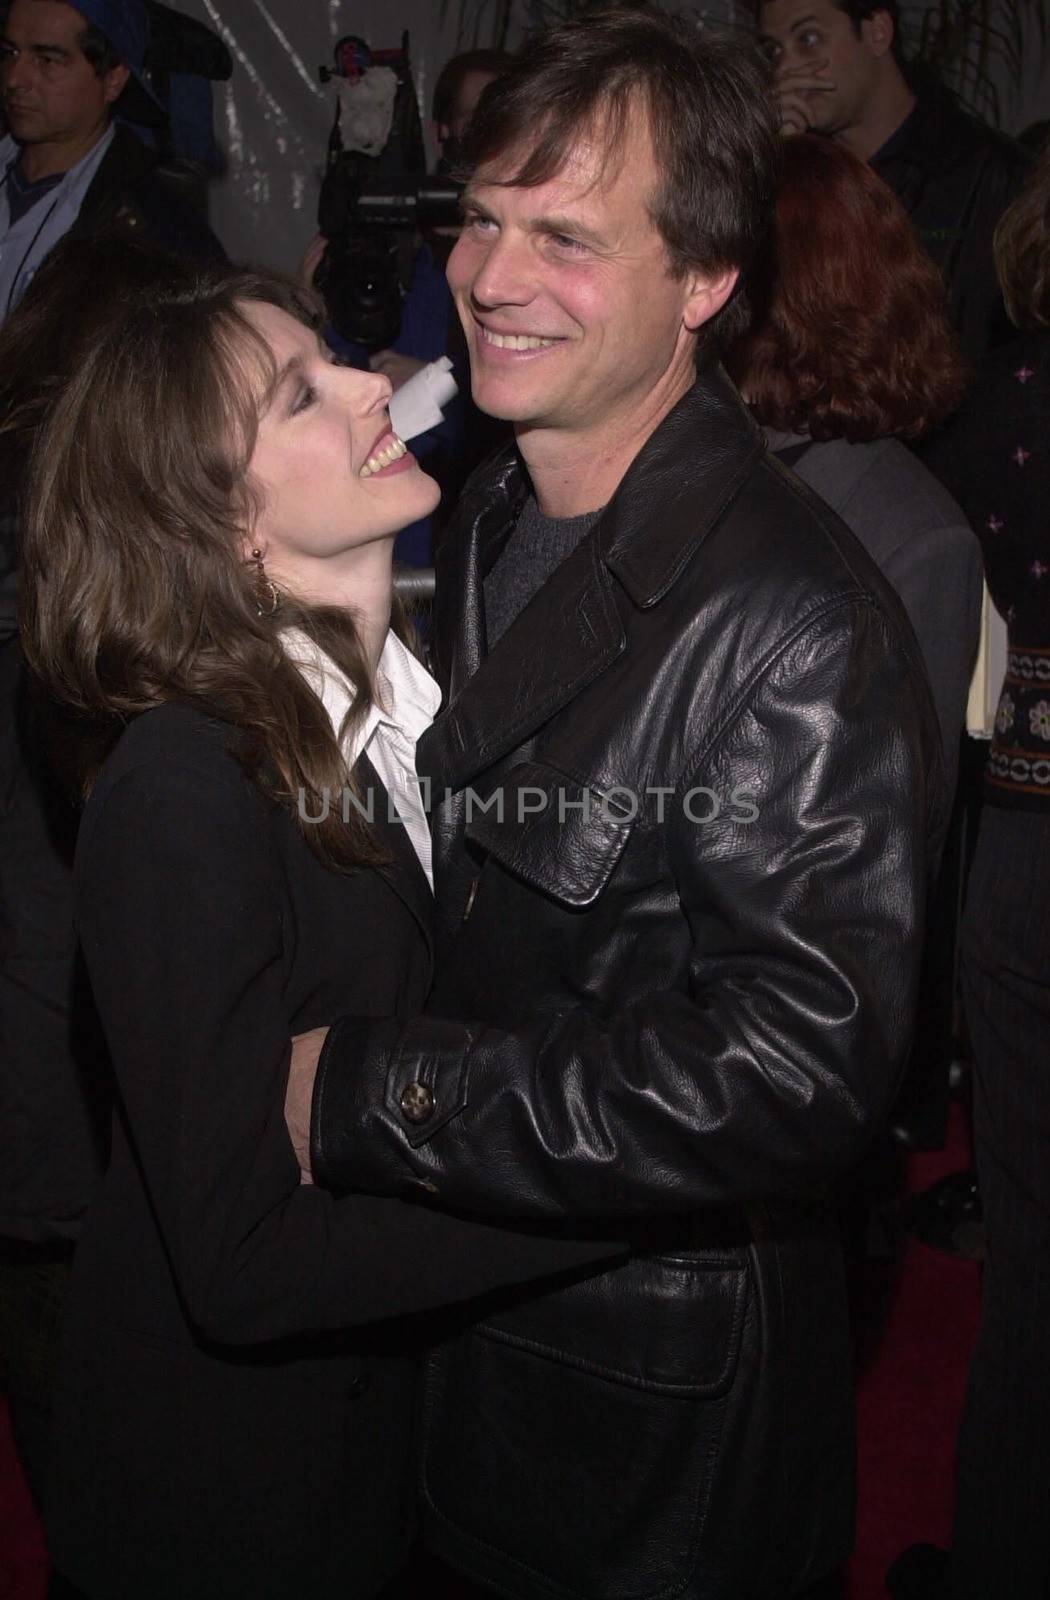 Bill Paxton and Louise Newbury at the premiere of Universal's "U-571" in Westwood, 04-17-00